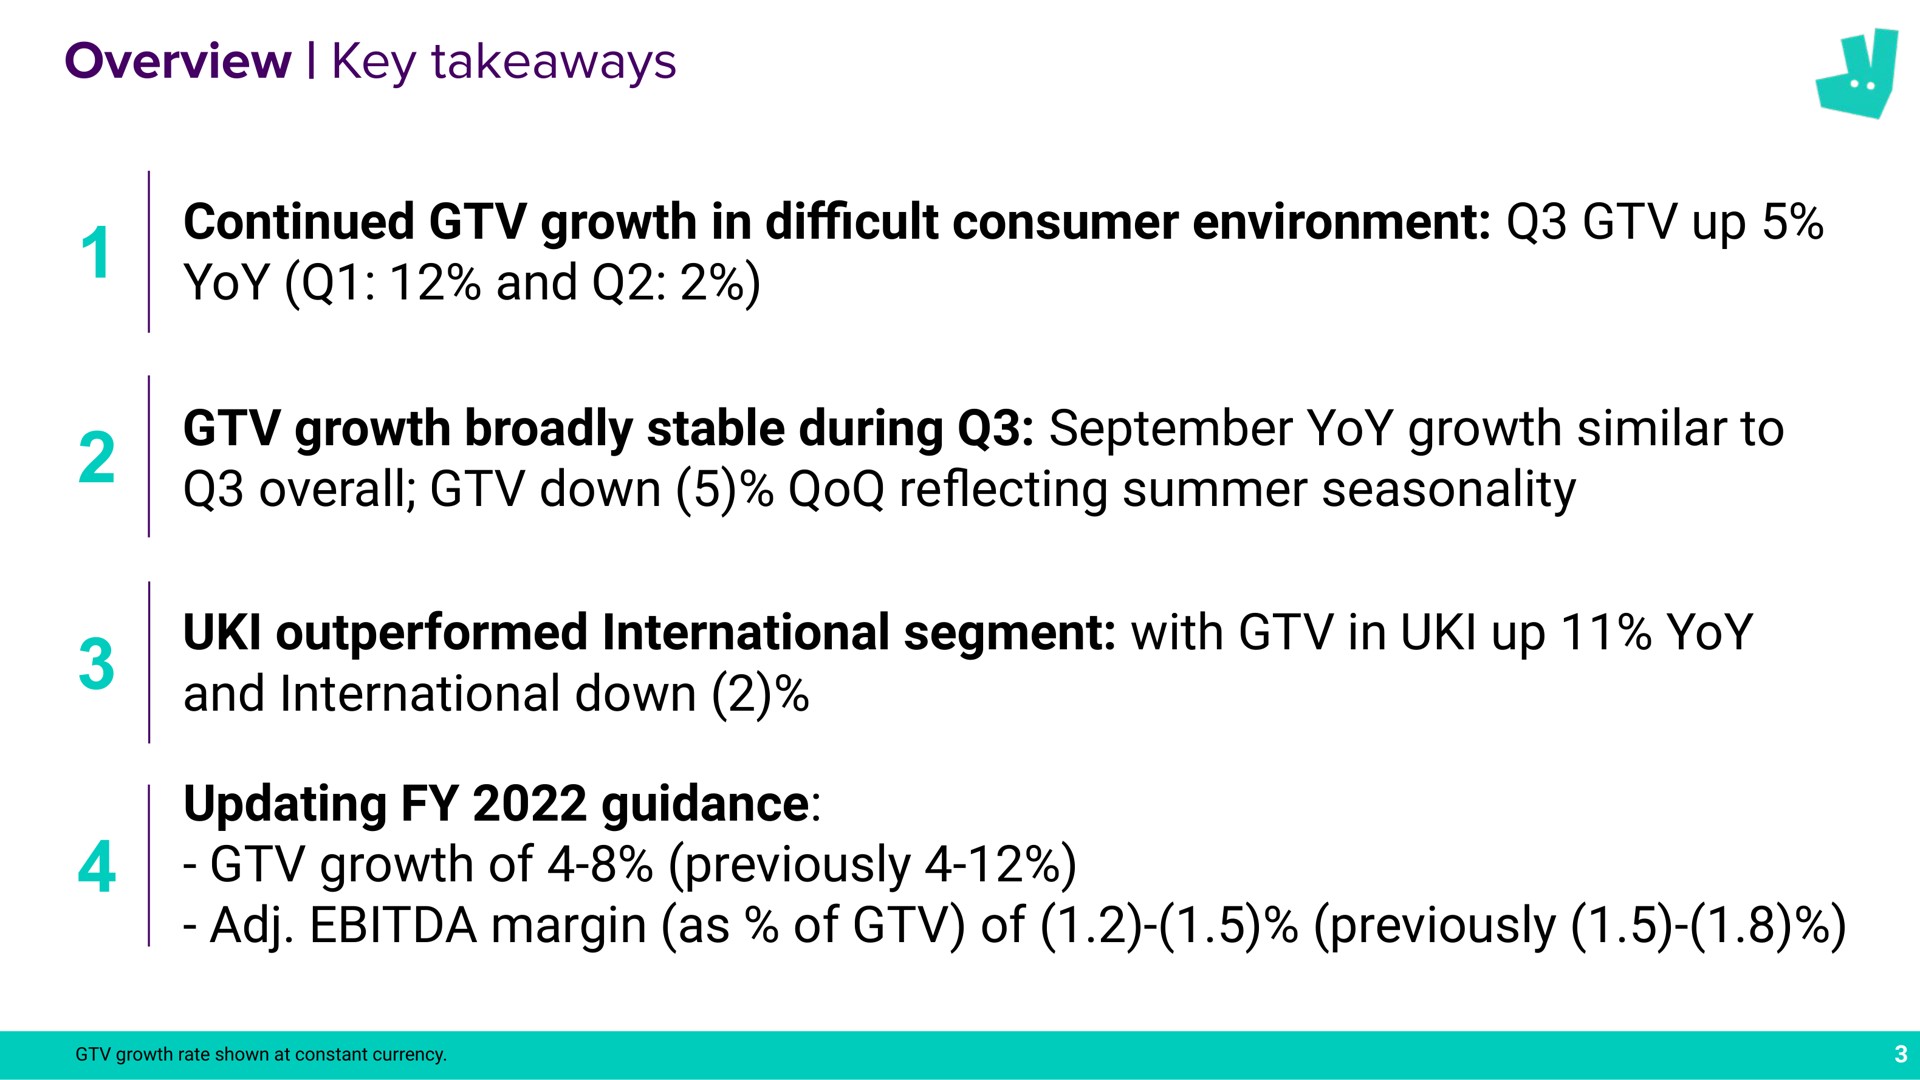 overview key continued growth in cult consumer environment up yoy and growth broadly stable during yoy growth similar to overall down summer seasonality outperformed international segment with in up yoy and international down updating guidance growth of previously margin as of of previously a difficult reflecting | Deliveroo